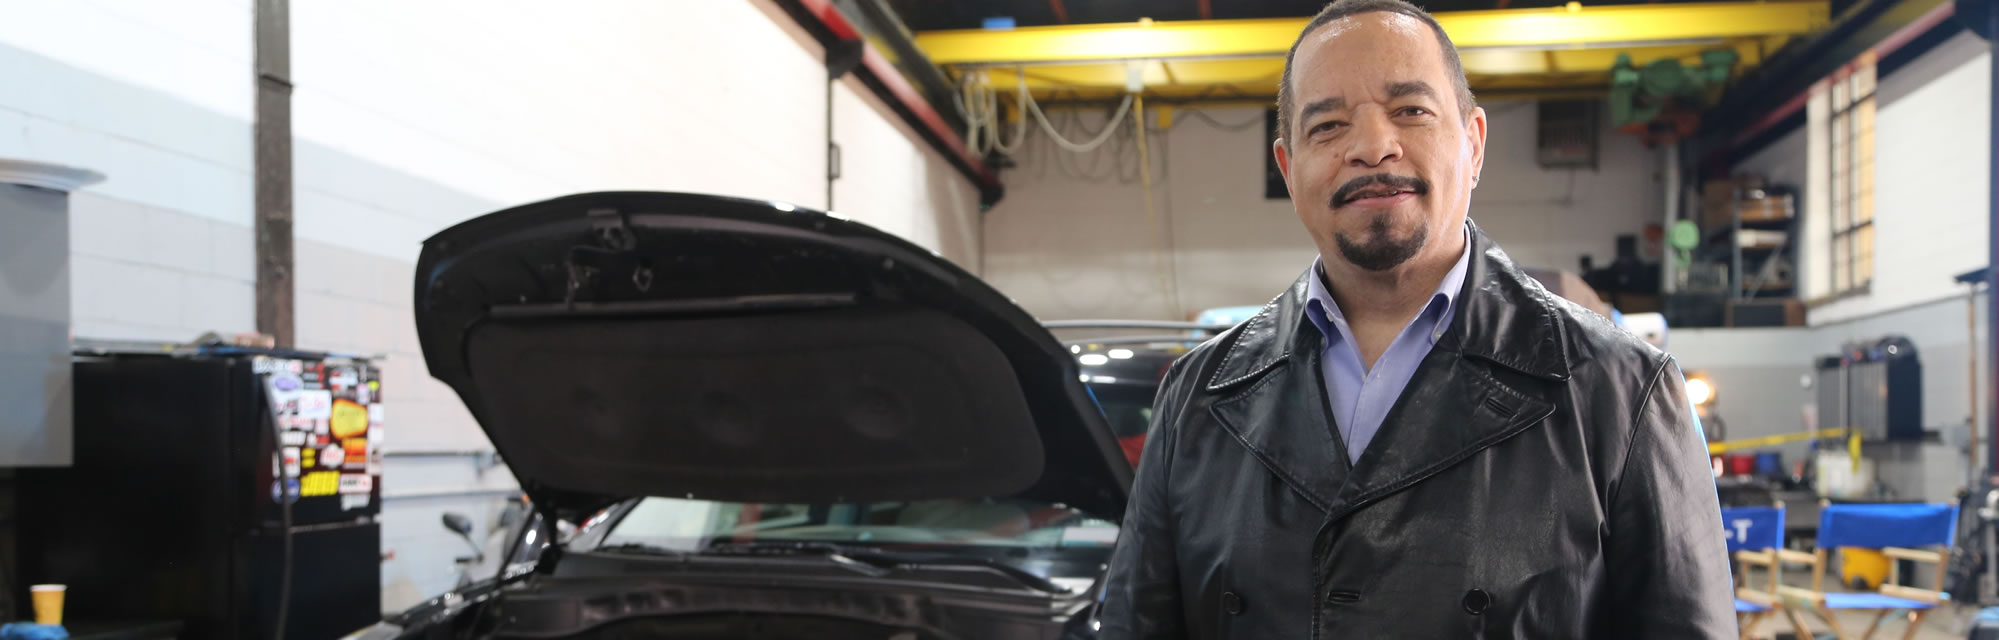 Ice-T at a mechanic